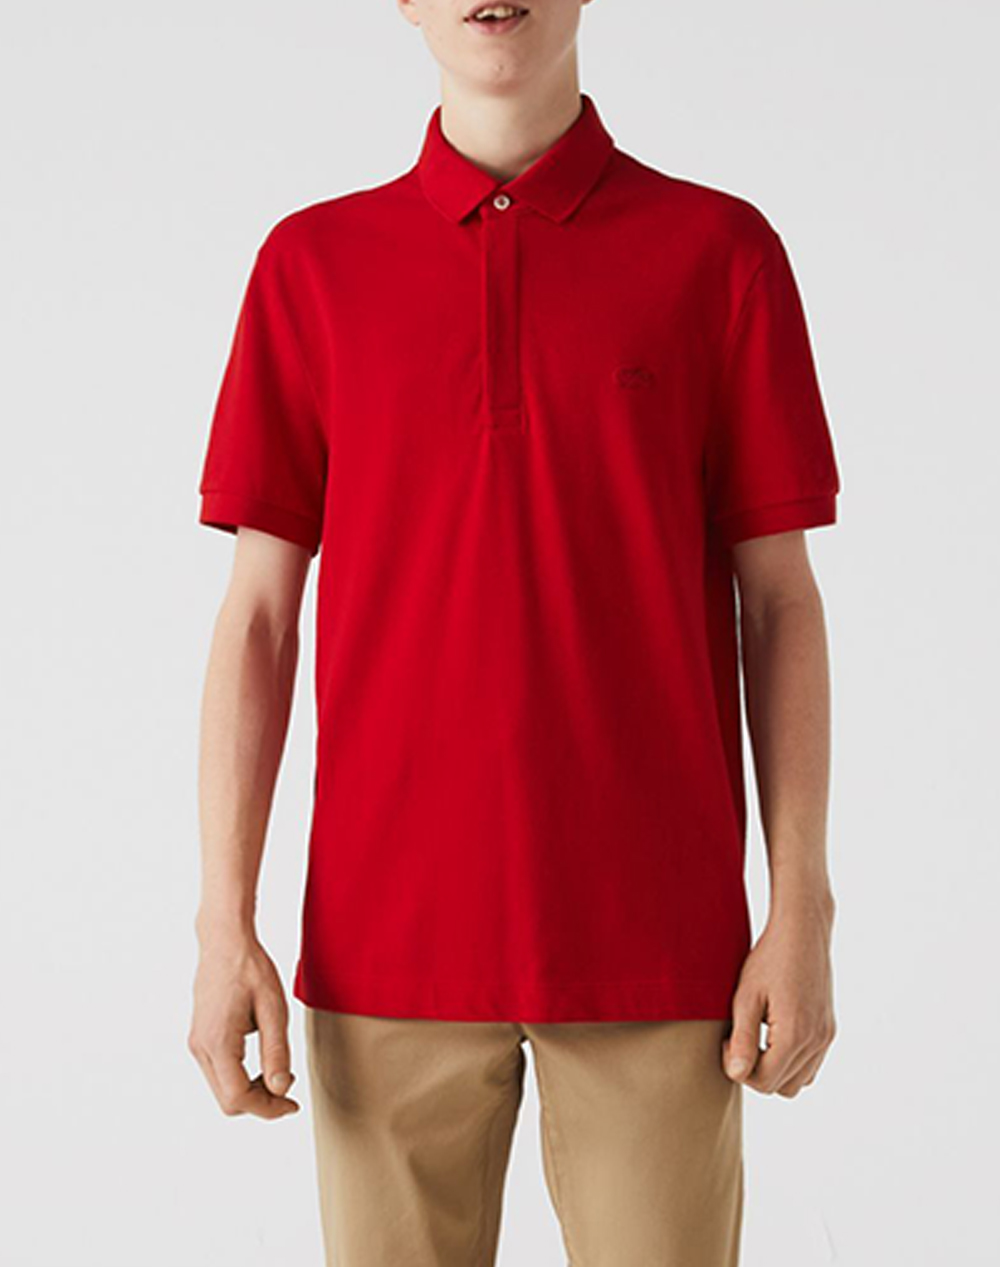 LACOSTE ΜΠΛΟΥΖΑ ΚΜ POLO SS 3PH5522-240 Red